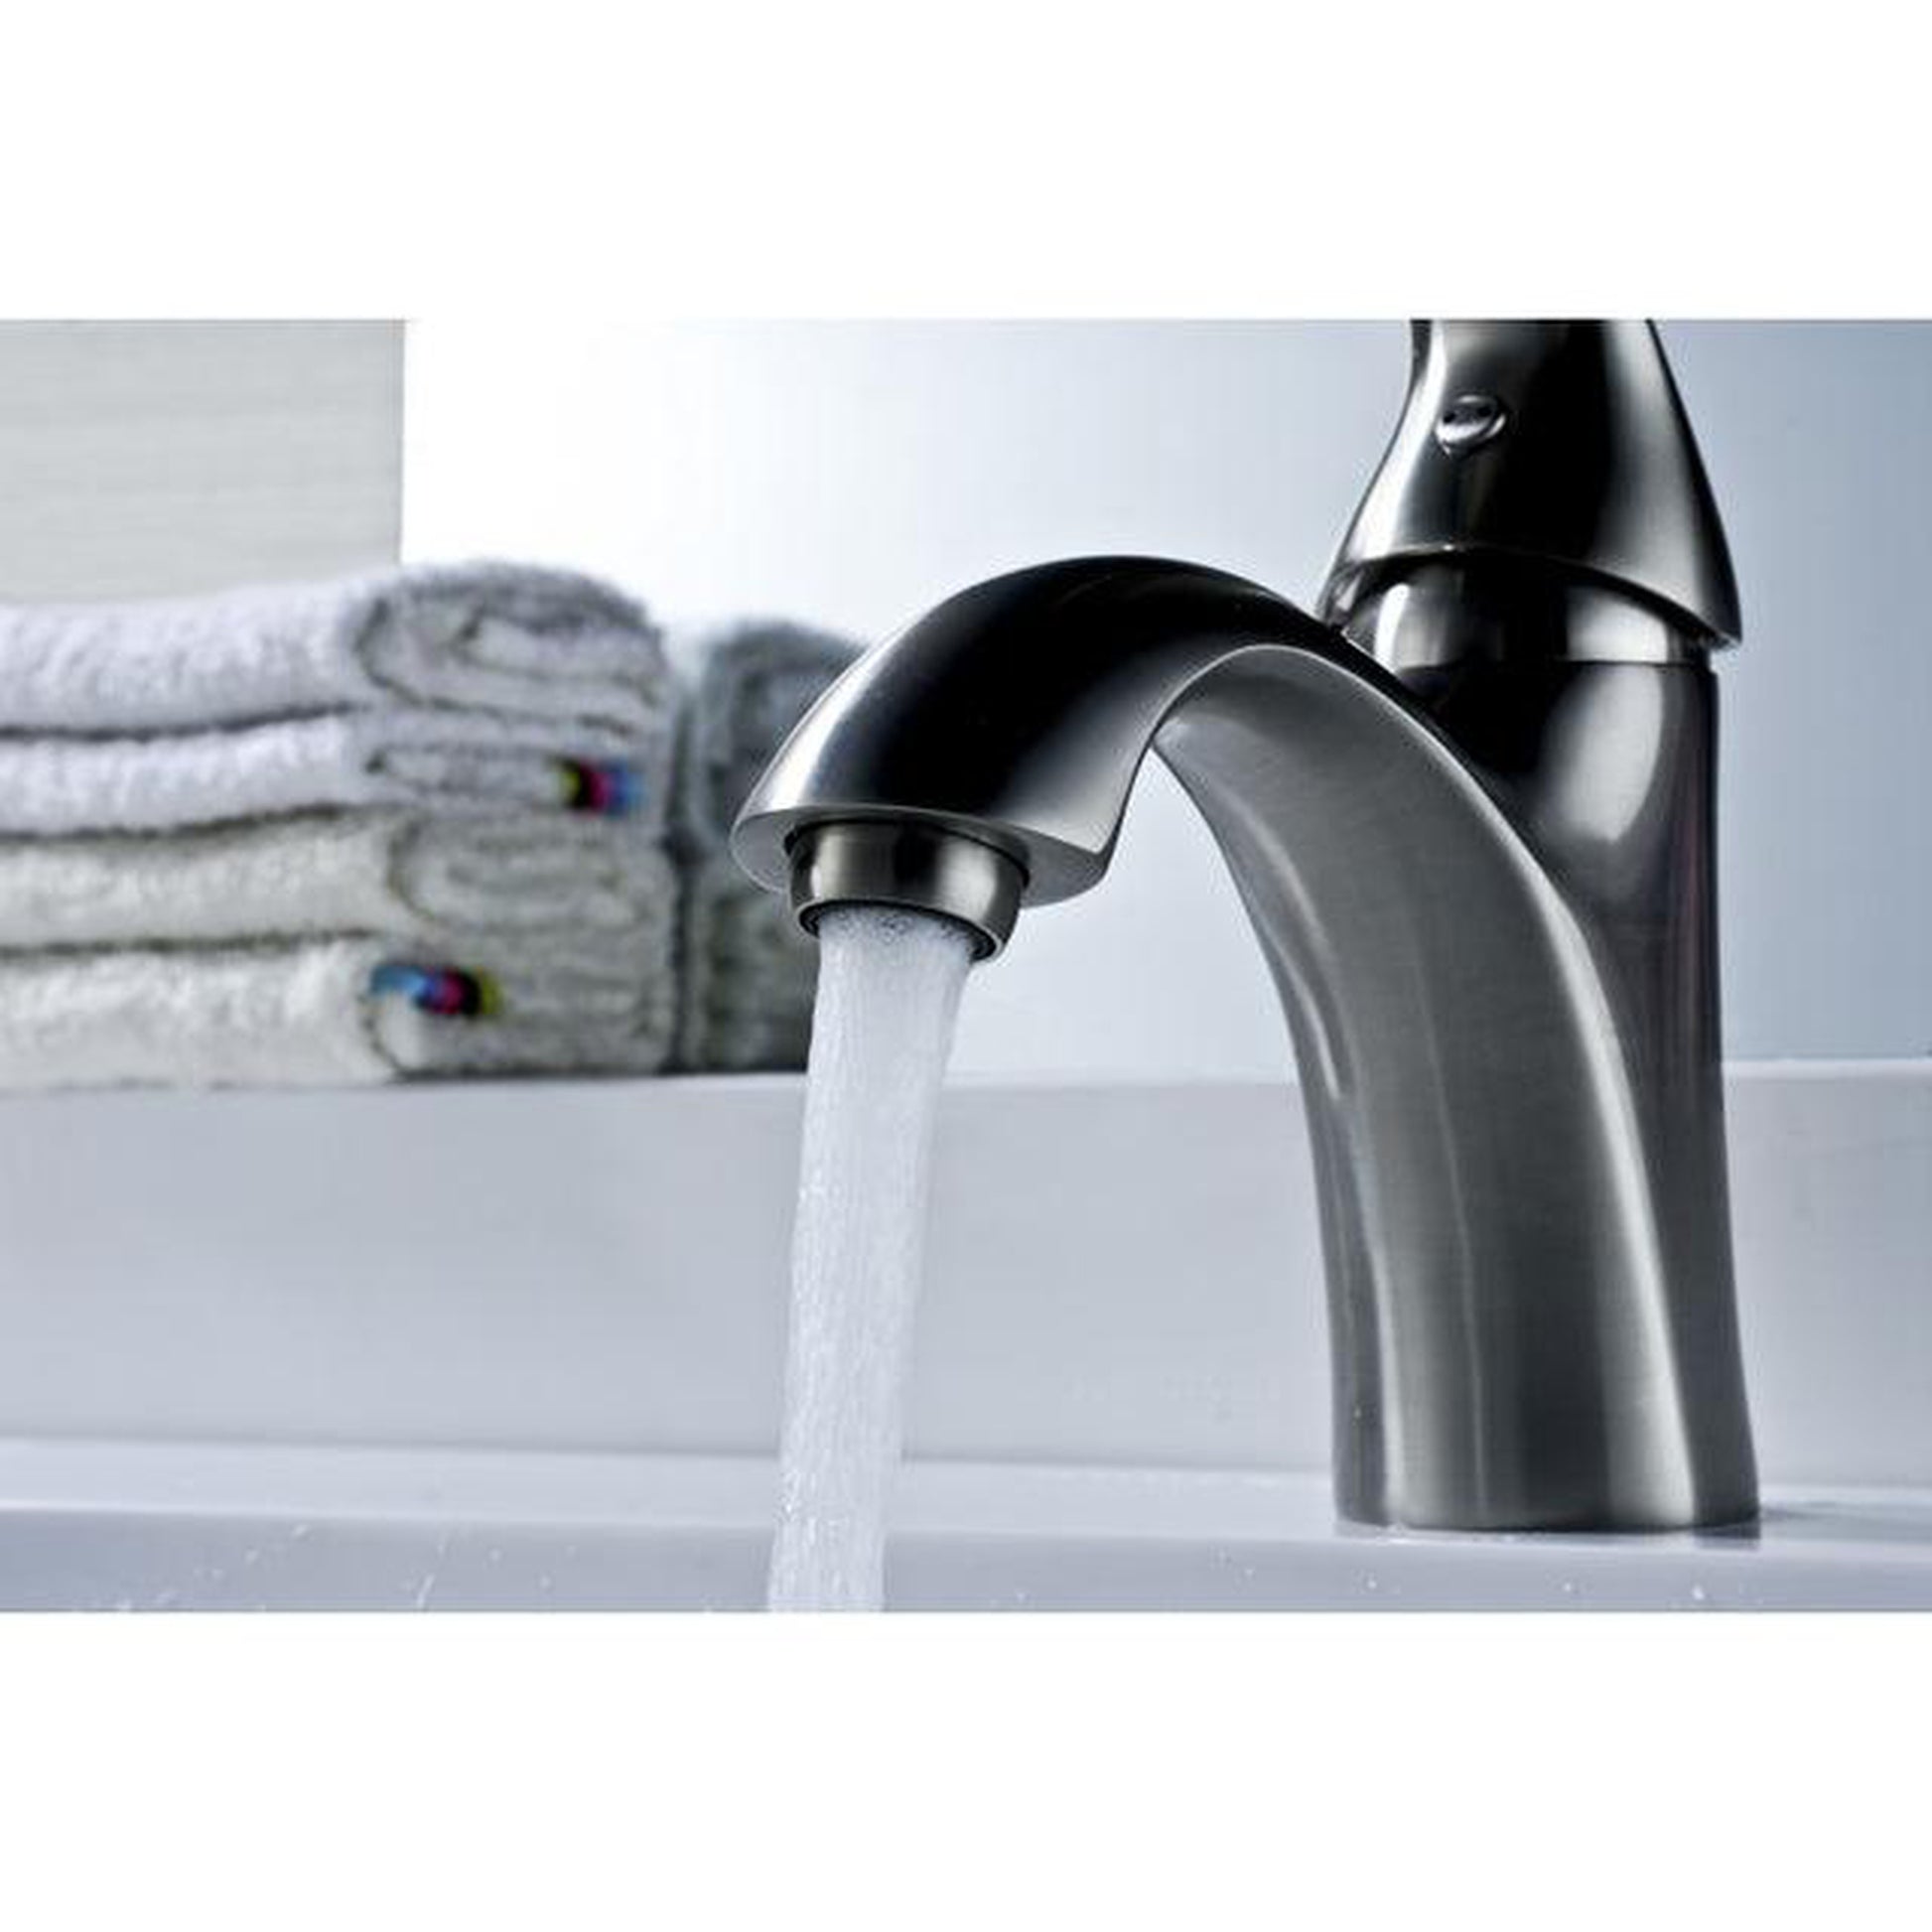 ANZZI Clavier Series 3" Single Hole Brushed Nickel Mid-Arc Bathroom Sink Faucet With Single Lever Handle